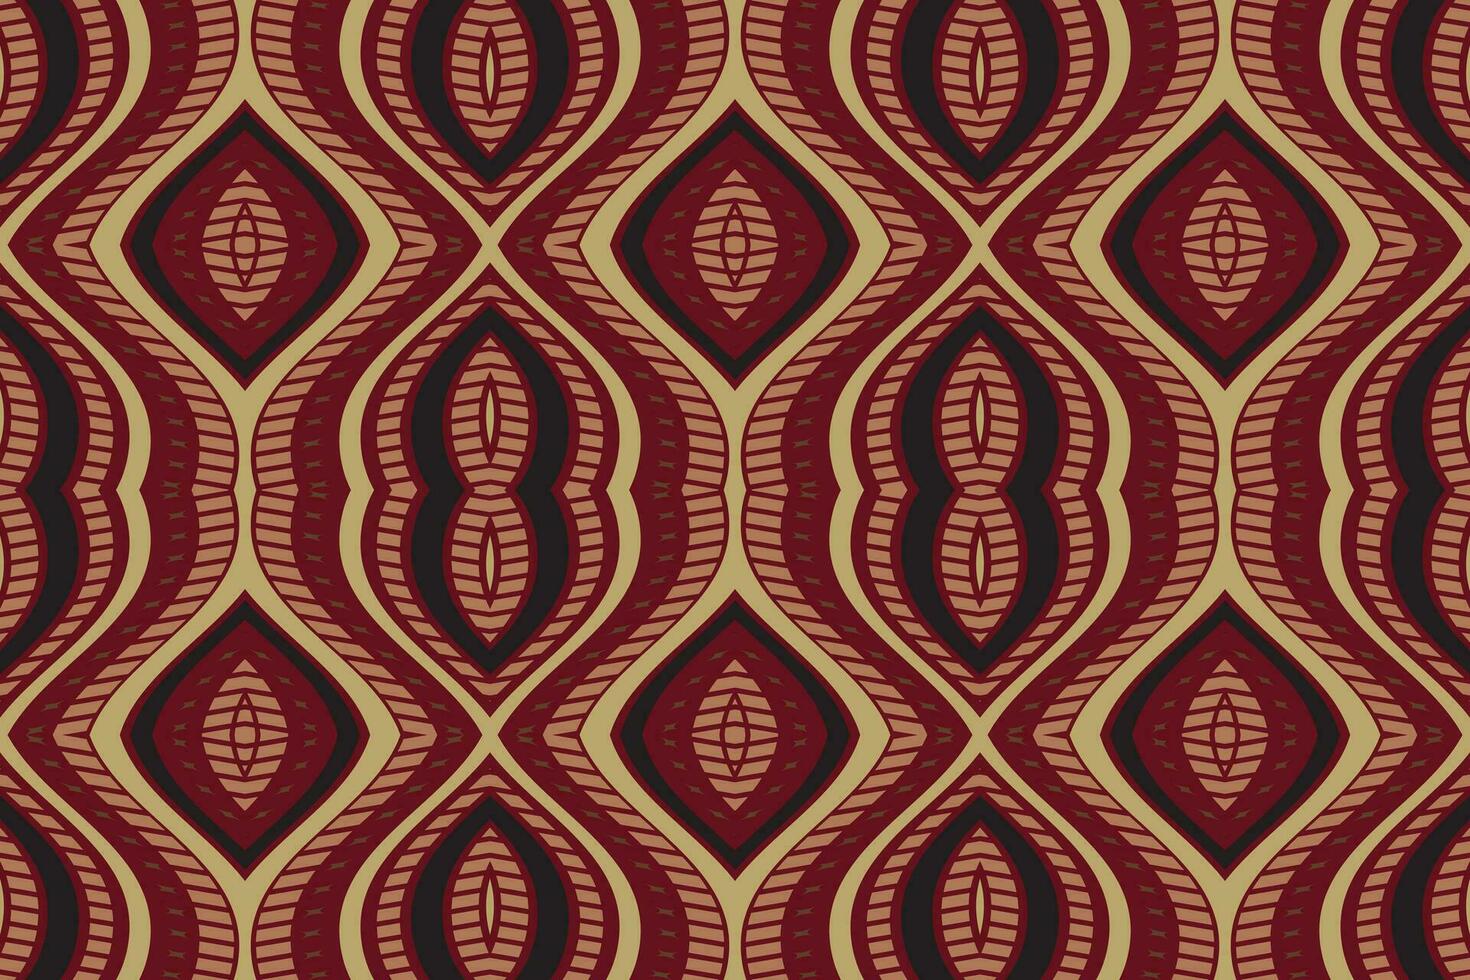 Ikat Damask Paisley Embroidery Background. Ikat Designs Geometric Ethnic Oriental Pattern Traditional. Ikat Aztec Style Abstract Design for Print Texture,fabric,saree,sari,carpet. vector